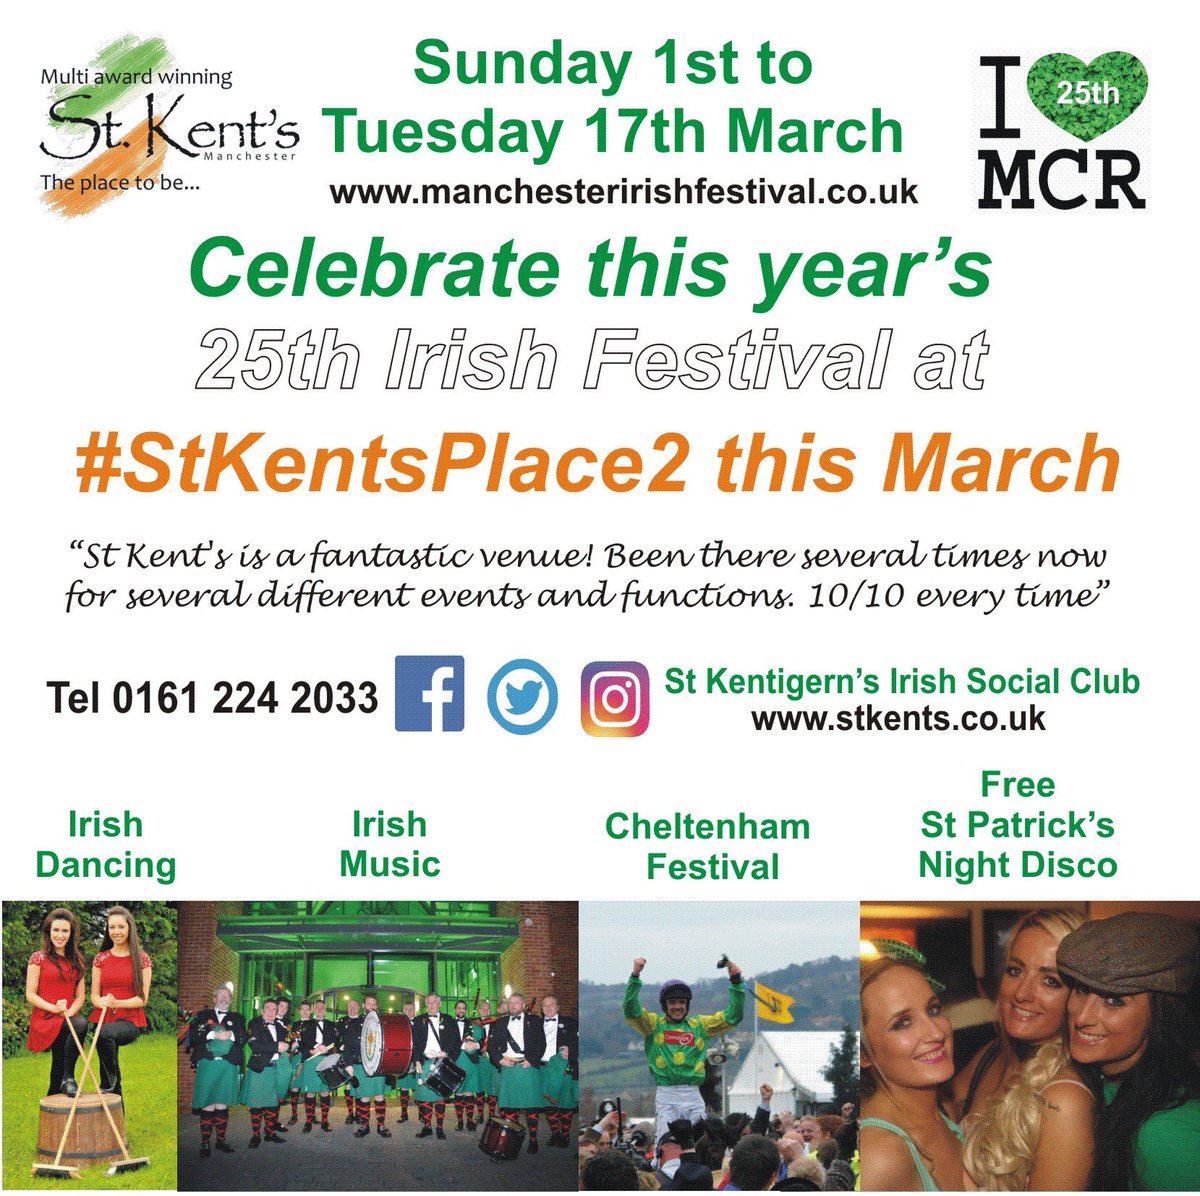 Watch out for some great #IrishEvents to celebrate this years 25th #ManchesterIrishFestival 1-17 March @StKentsPlace2B #Fallowfield #Manchester